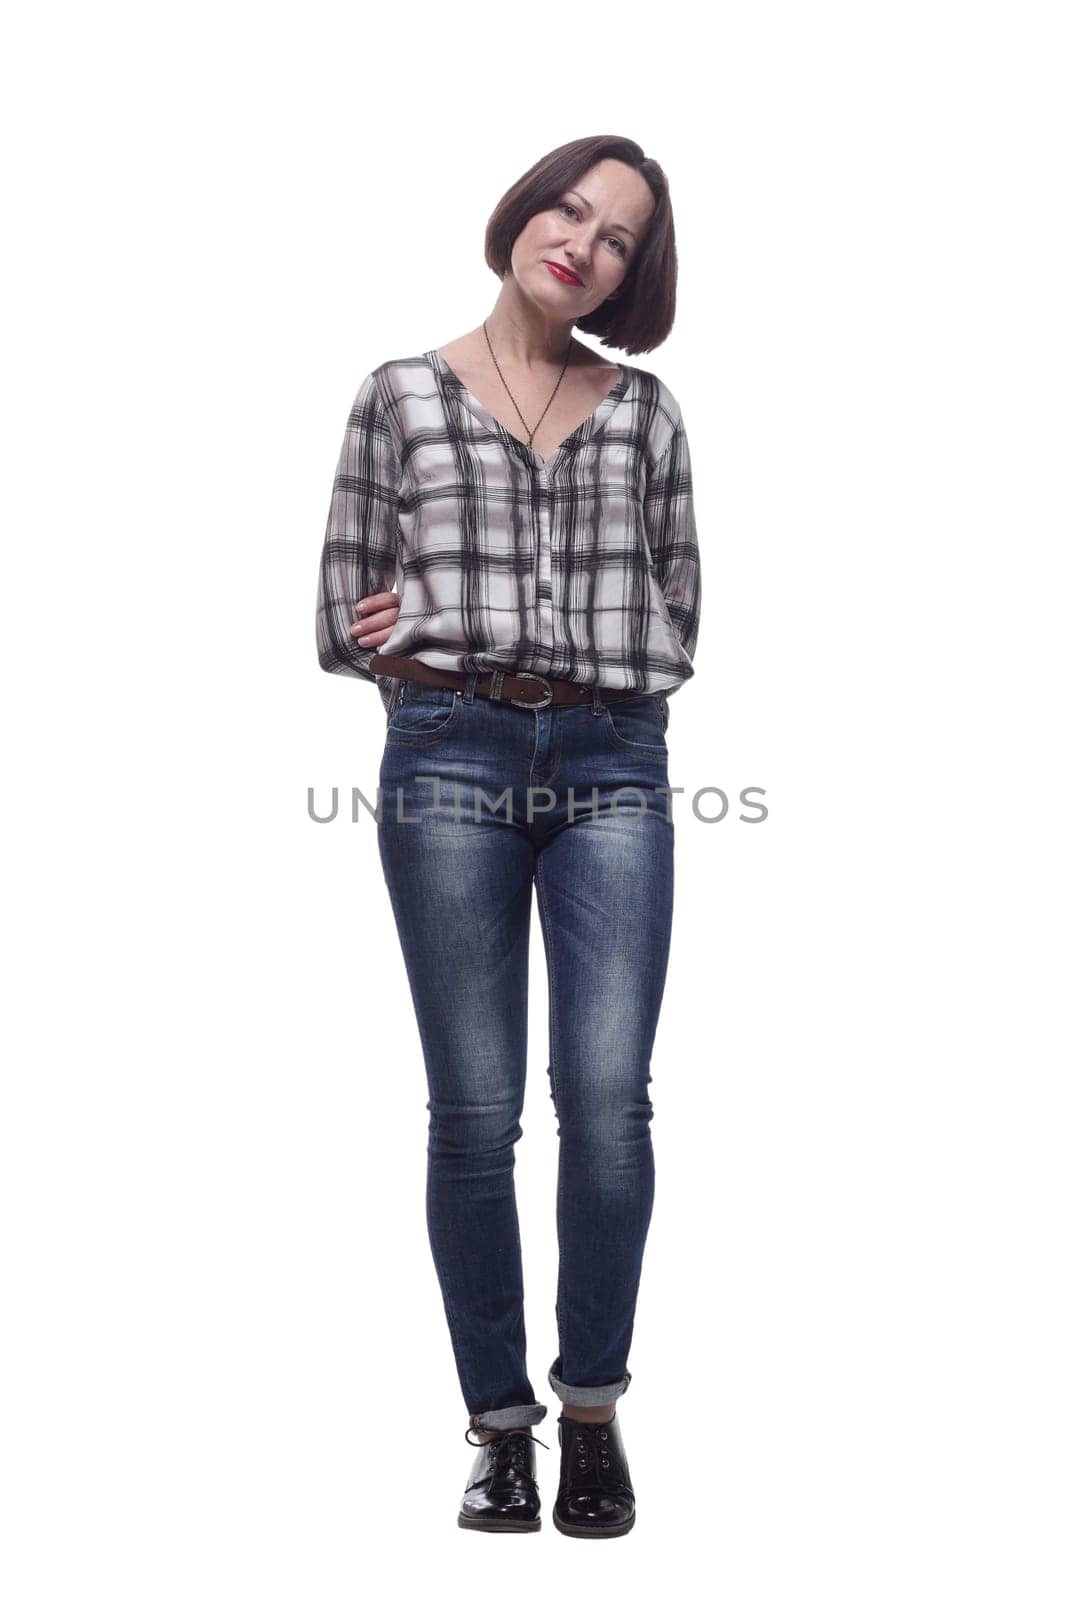 attractive mature woman in jeans showing thumbs up by asdf